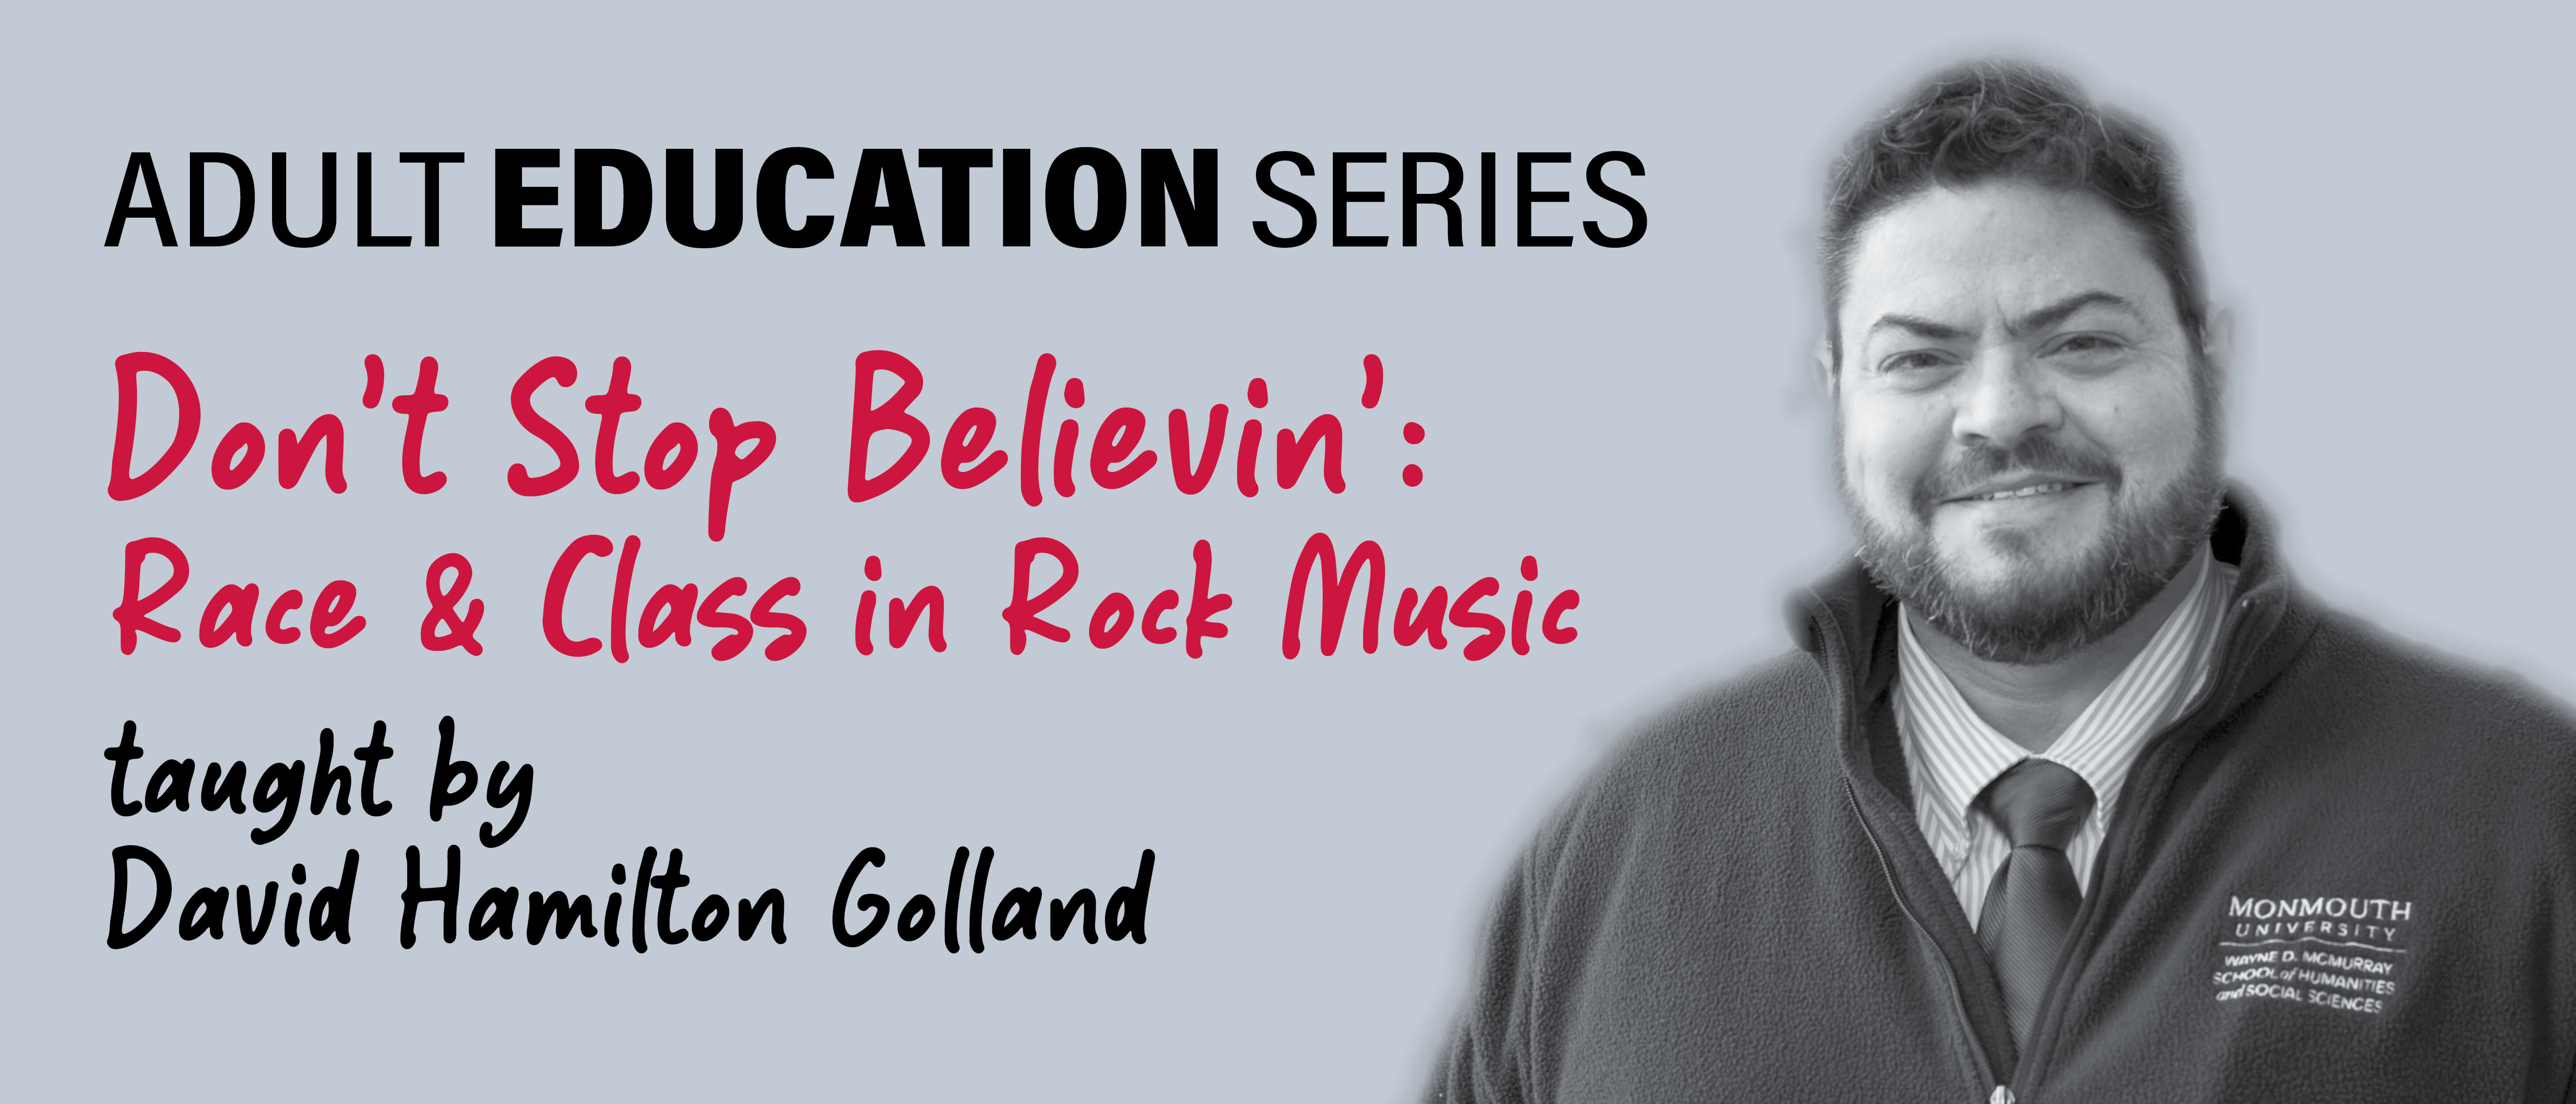 Adult Education Series: Don't Stop Believin': Race and Class in Rock Music